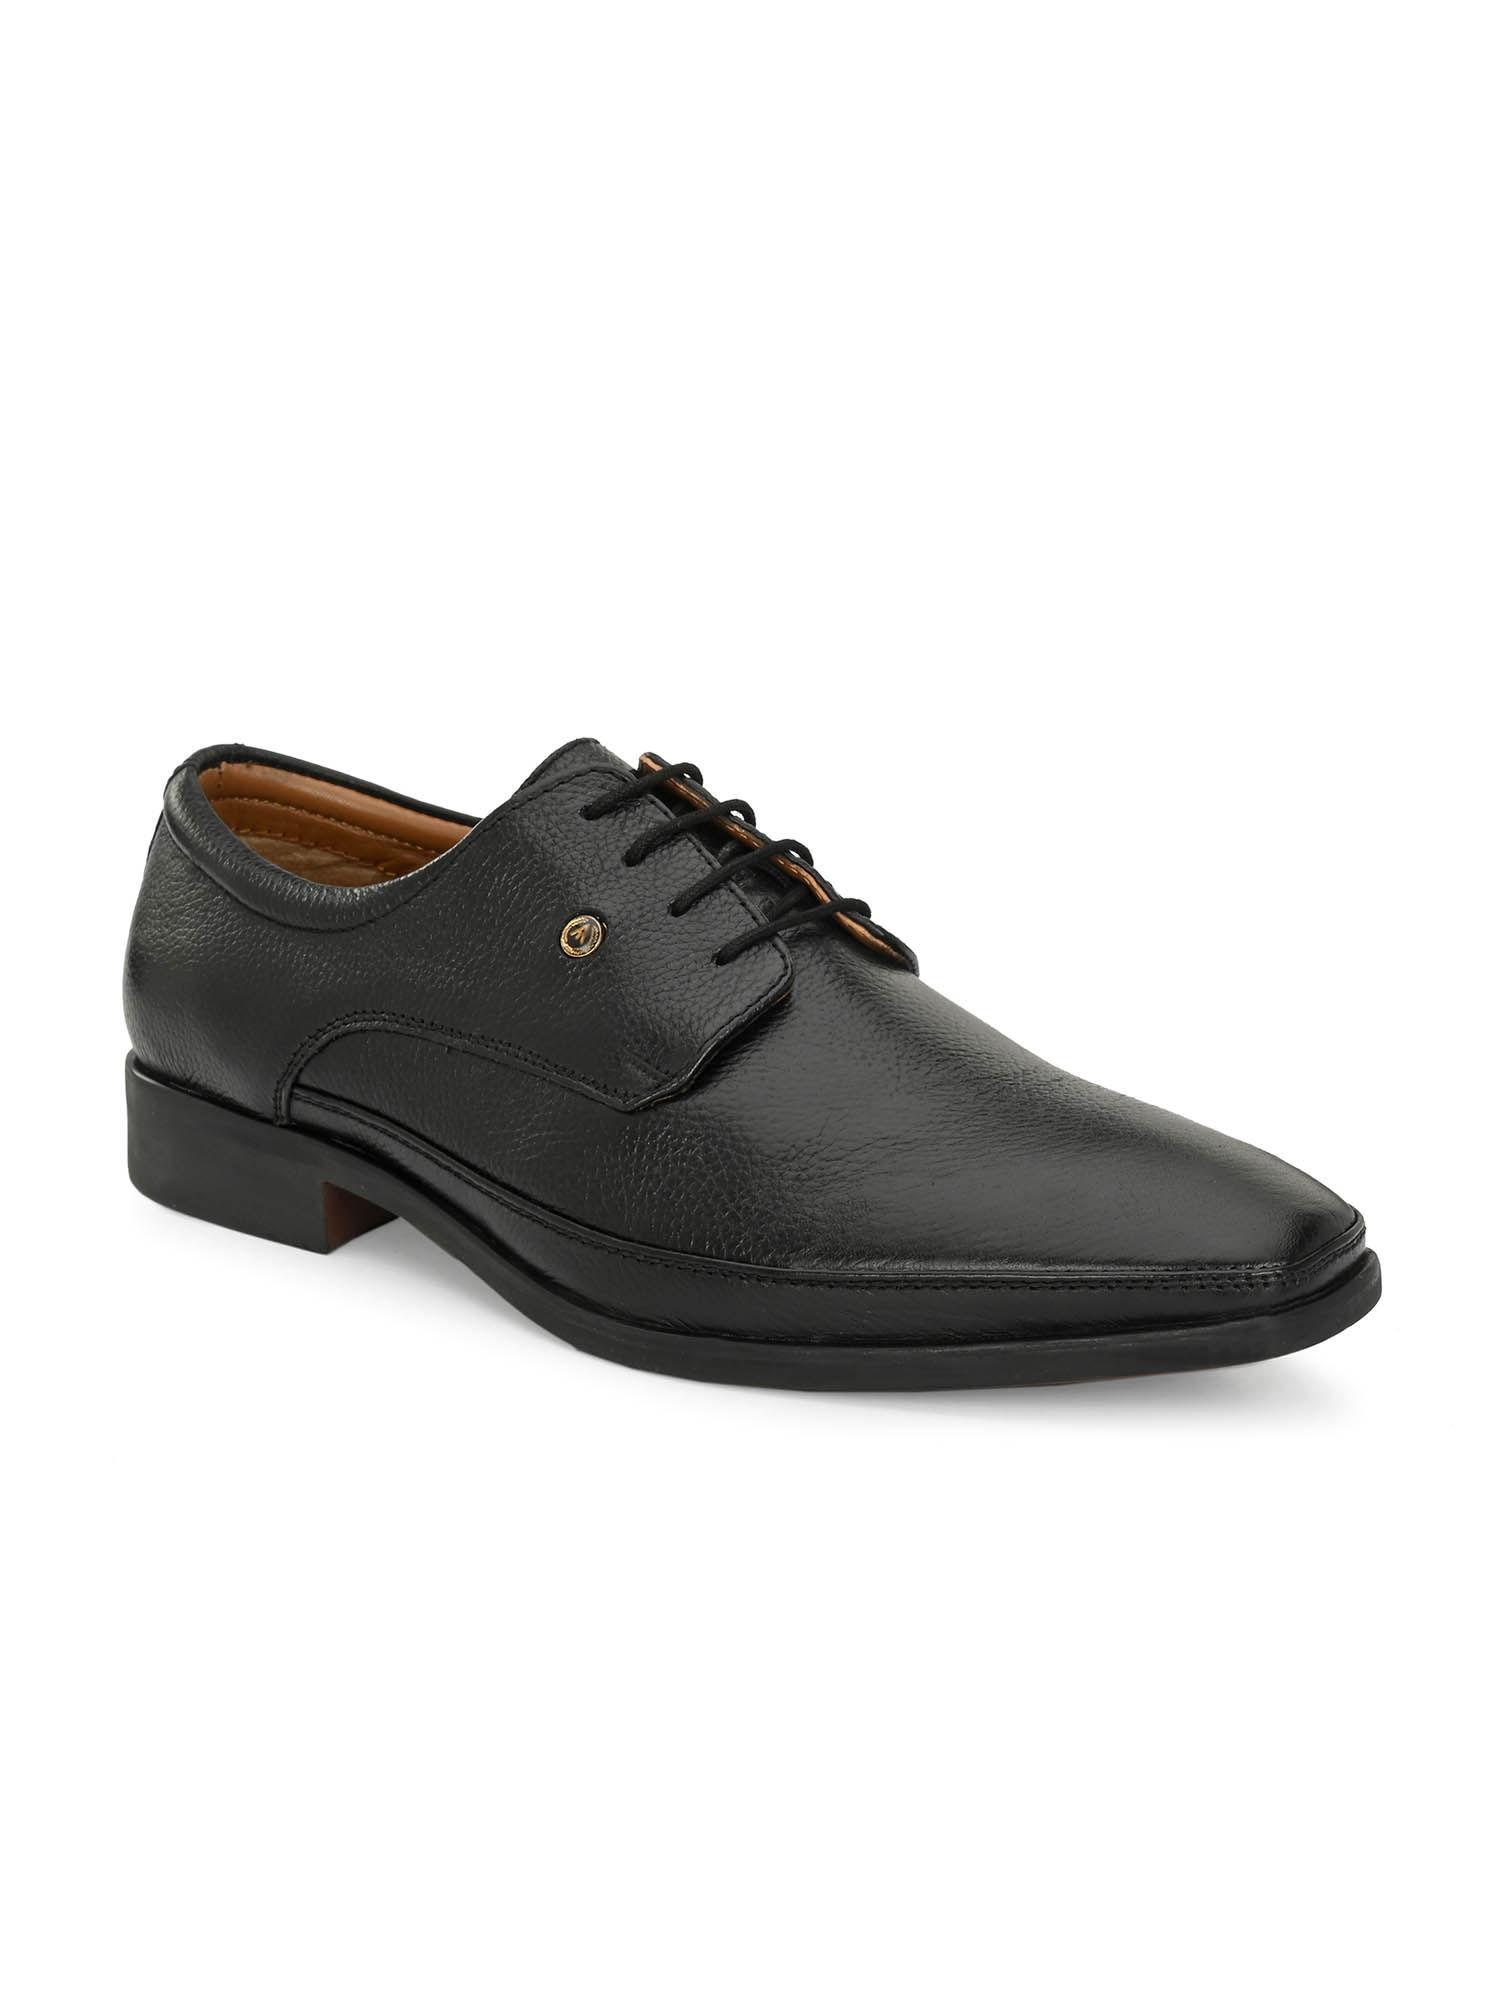 Genuine Leather Black Laceup Formal Shoes